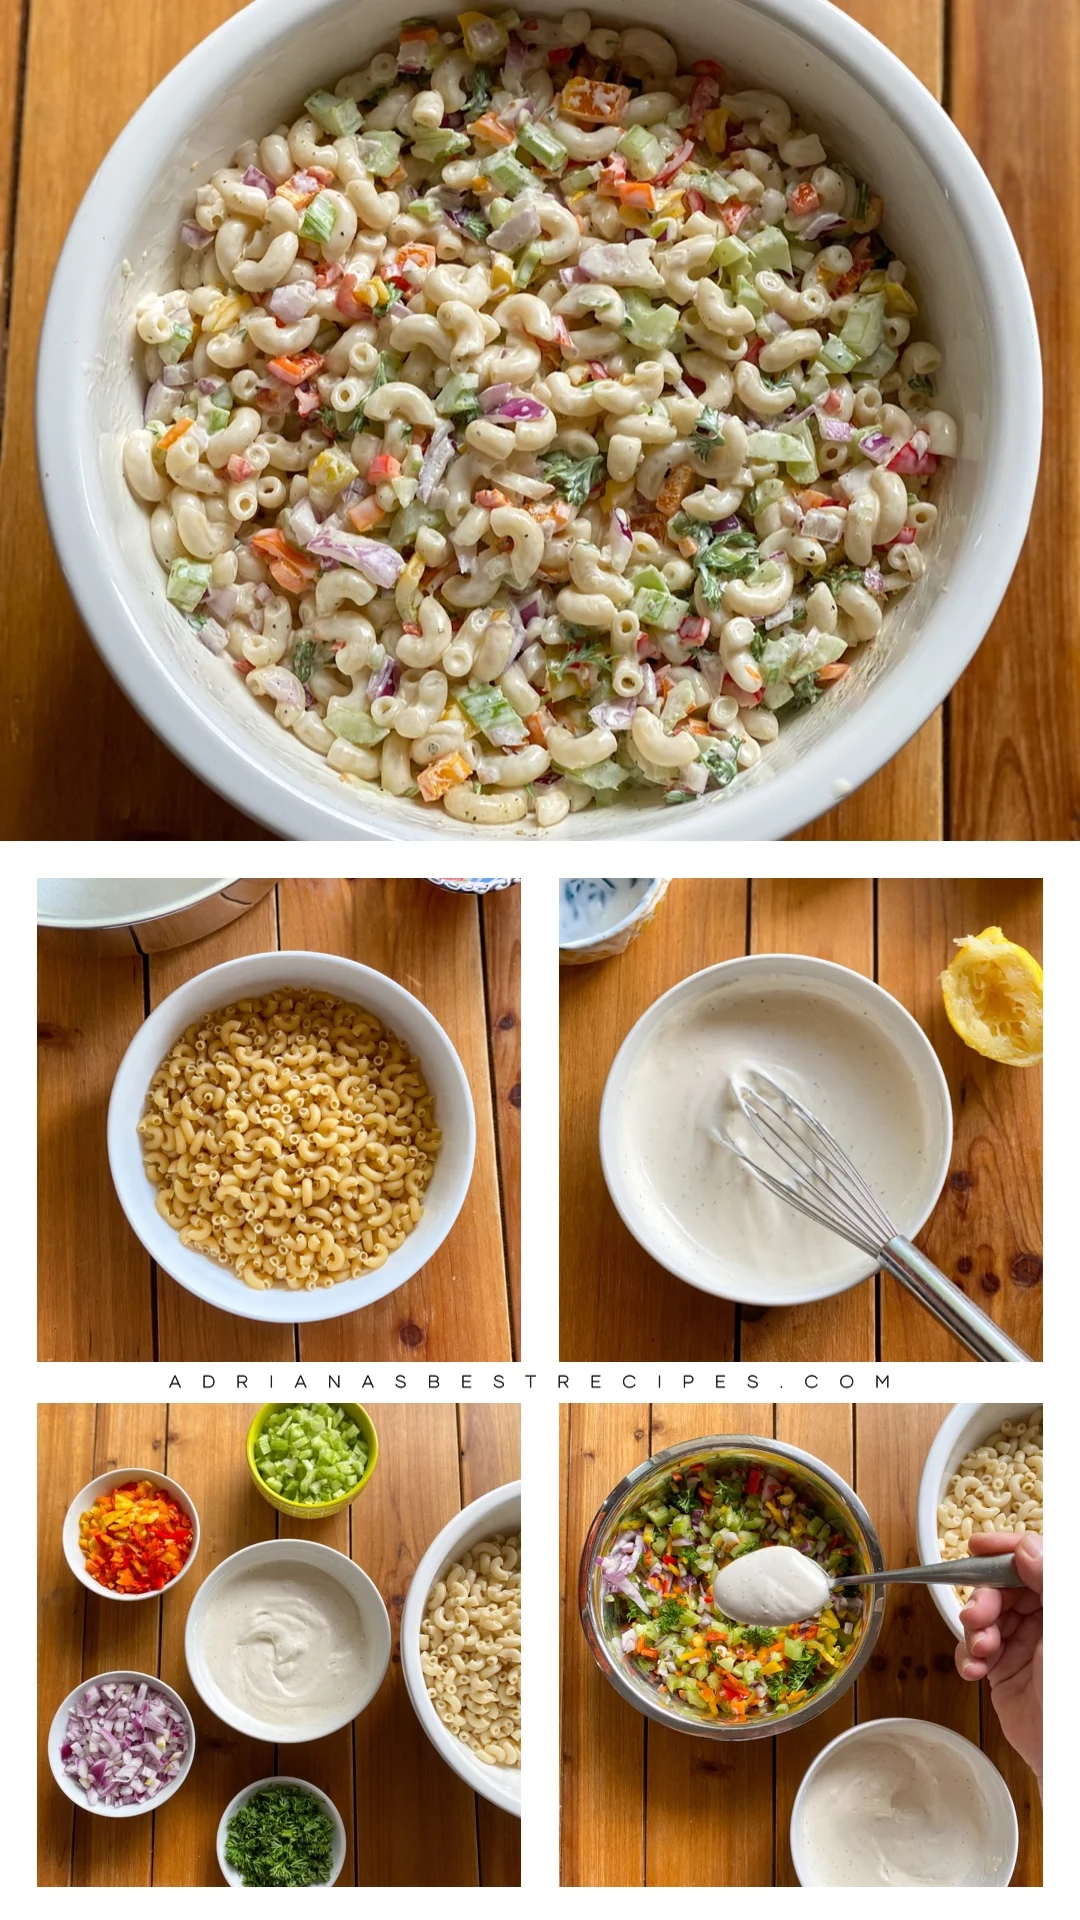 Step by step on how to make the Mexican macaroni salad